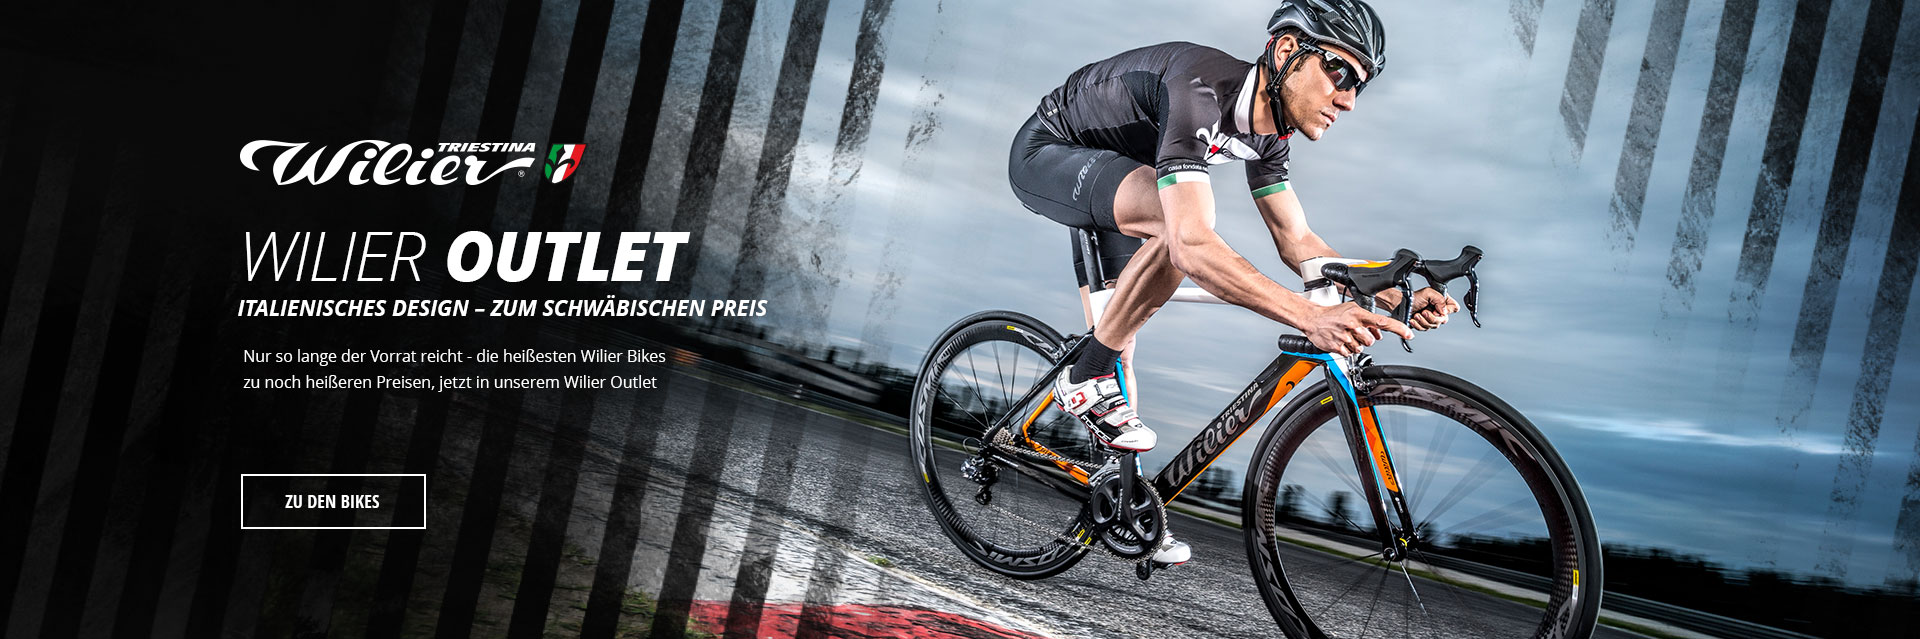 Wilier Outlet